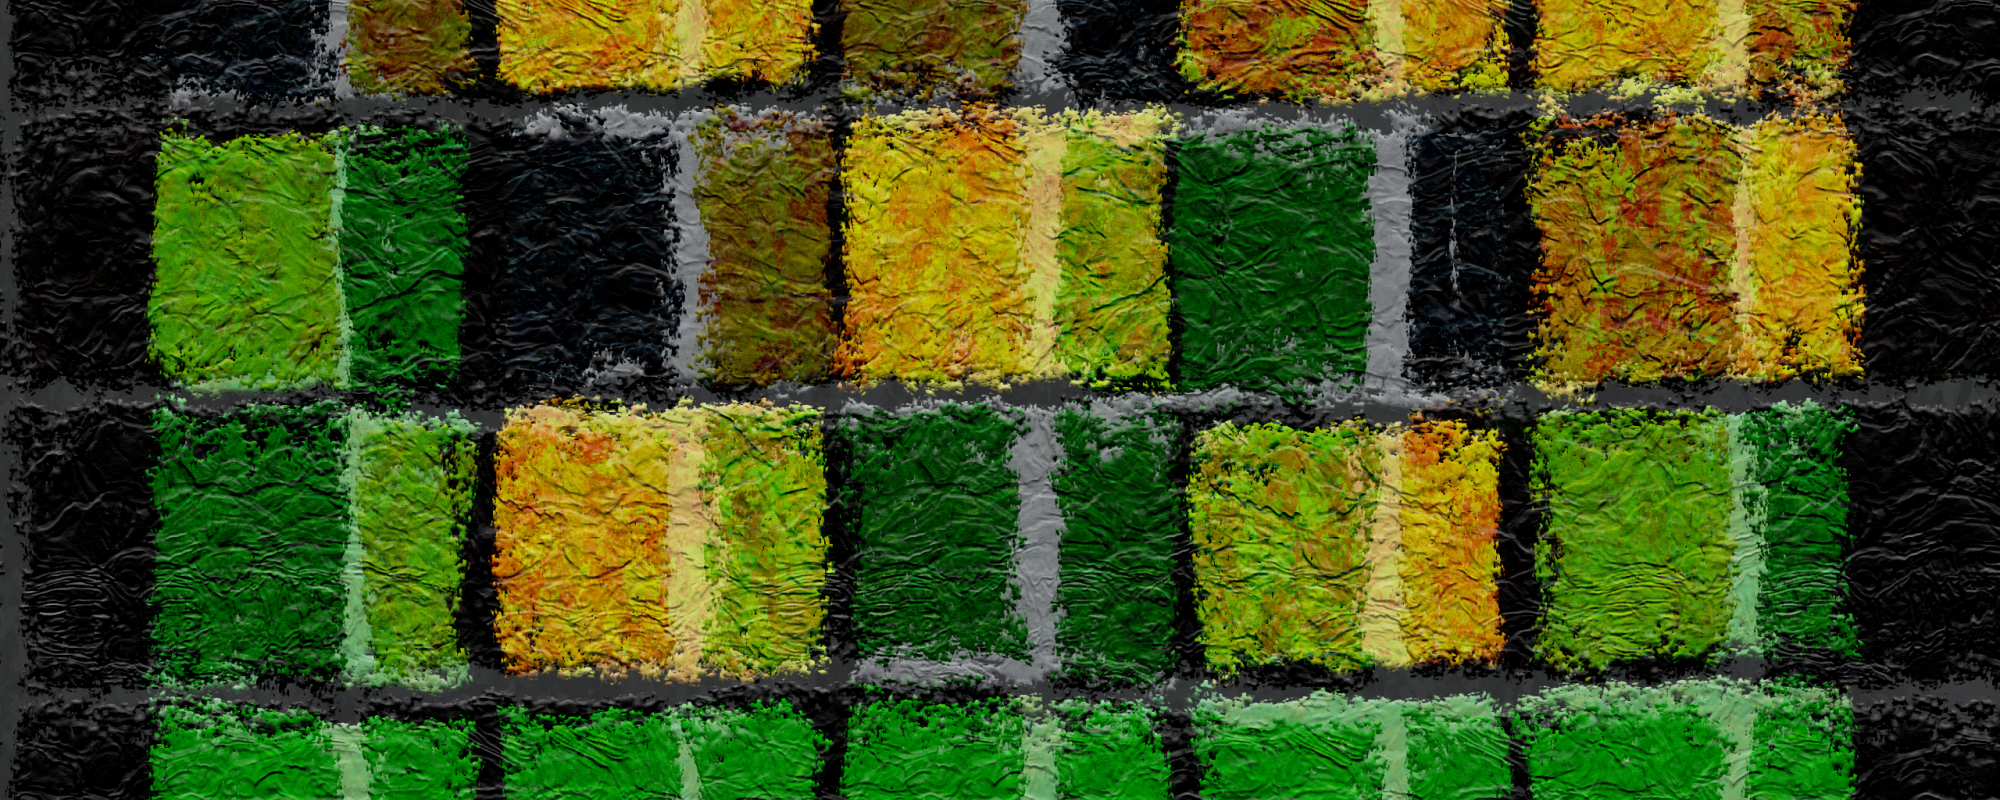 green blocks and yellow blocks stacked on top of one another